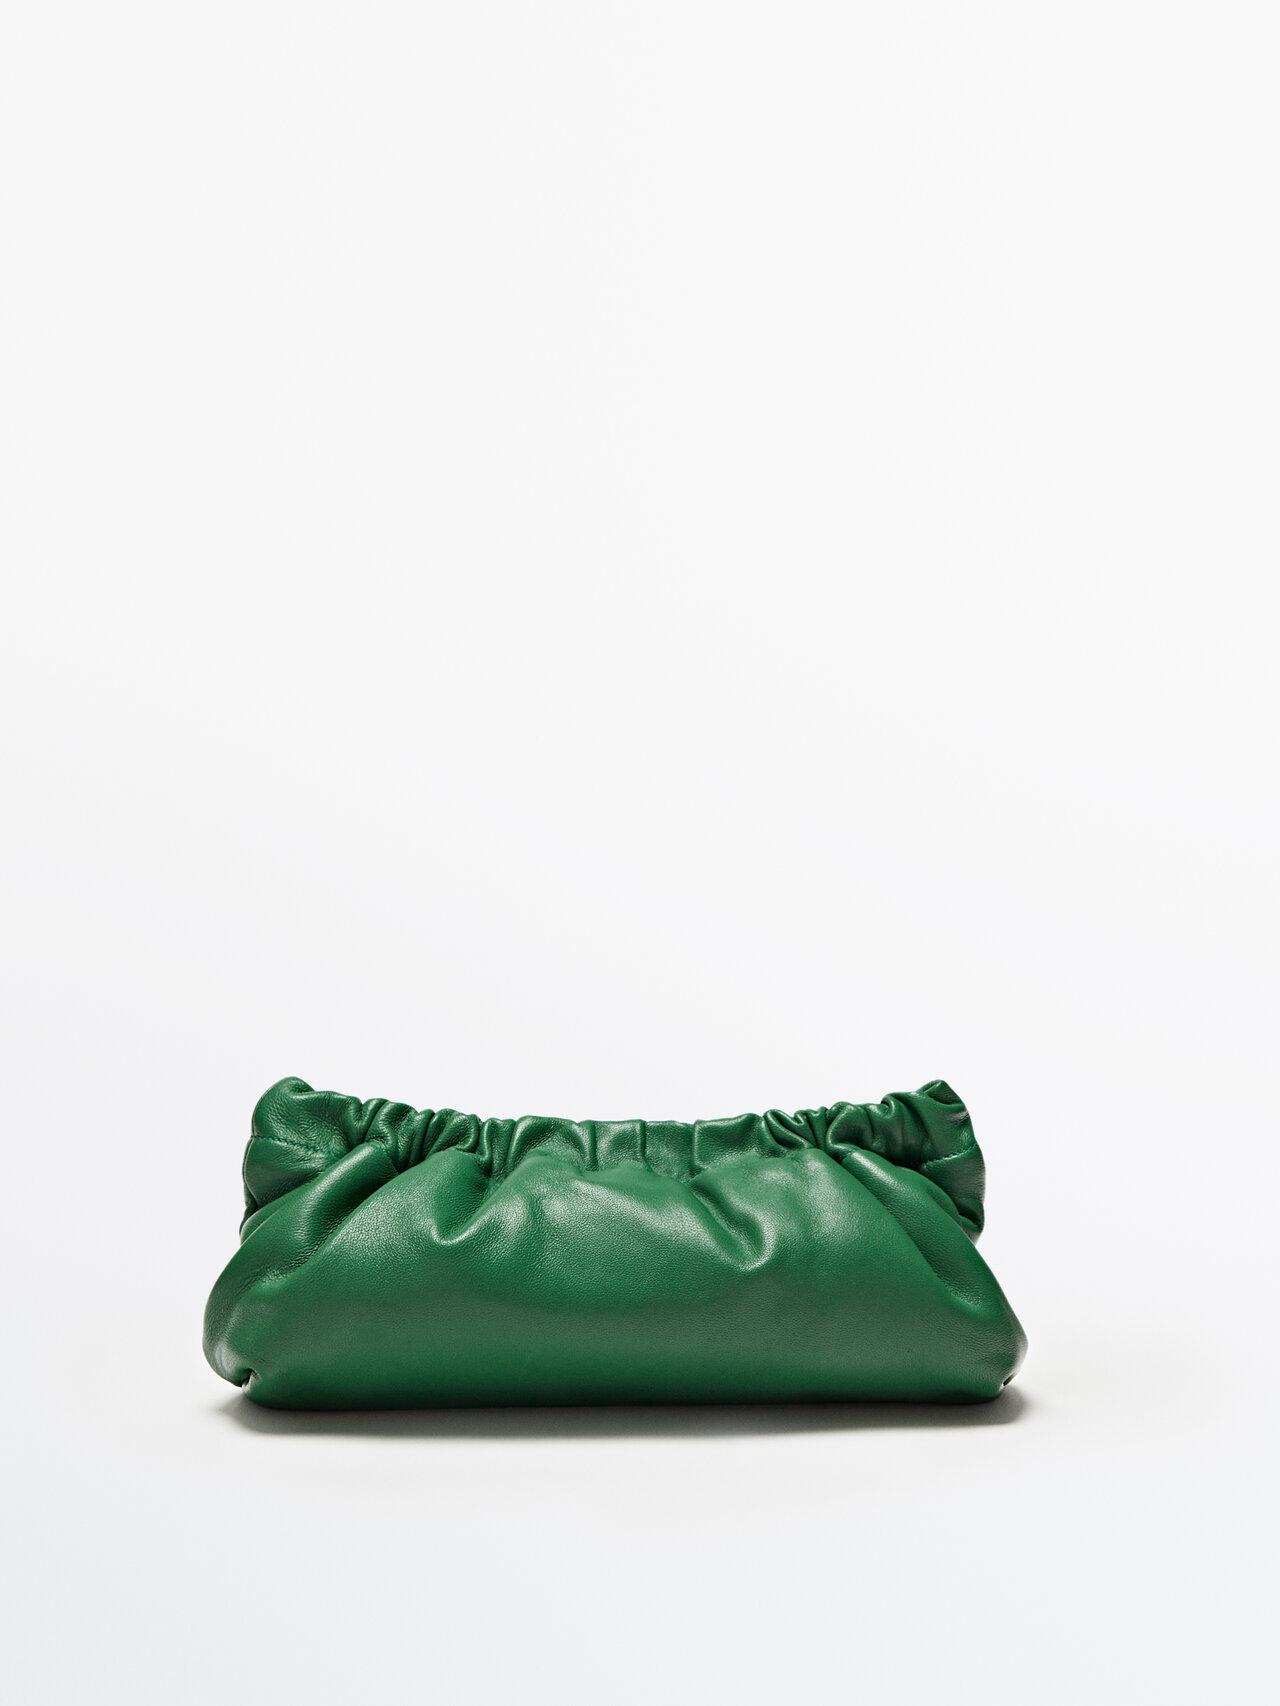 MASSIMO DUTTI Nappa Leather Bag With Gathered Details in Green | Lyst